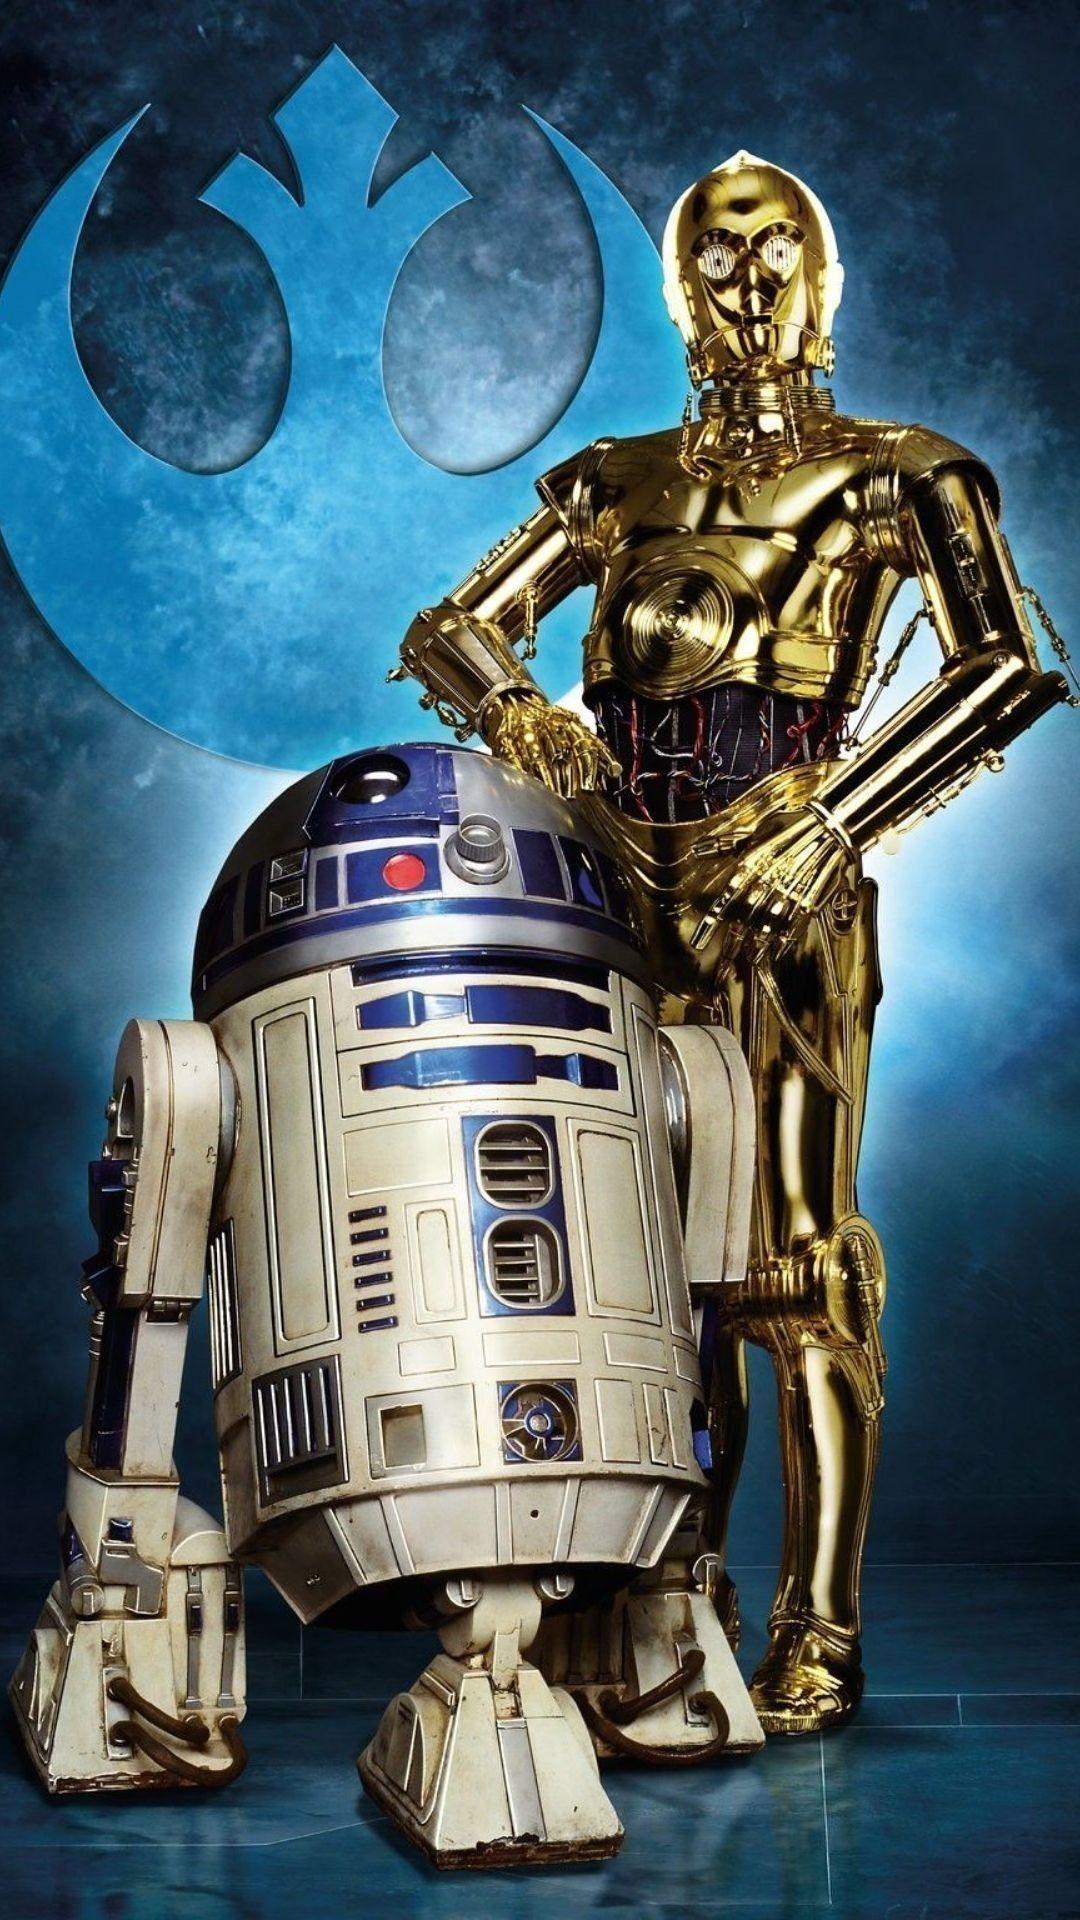 R2 D2 Iphone Wallpapers Top Free R2 D2 Iphone Backgrounds Wallpaperaccess